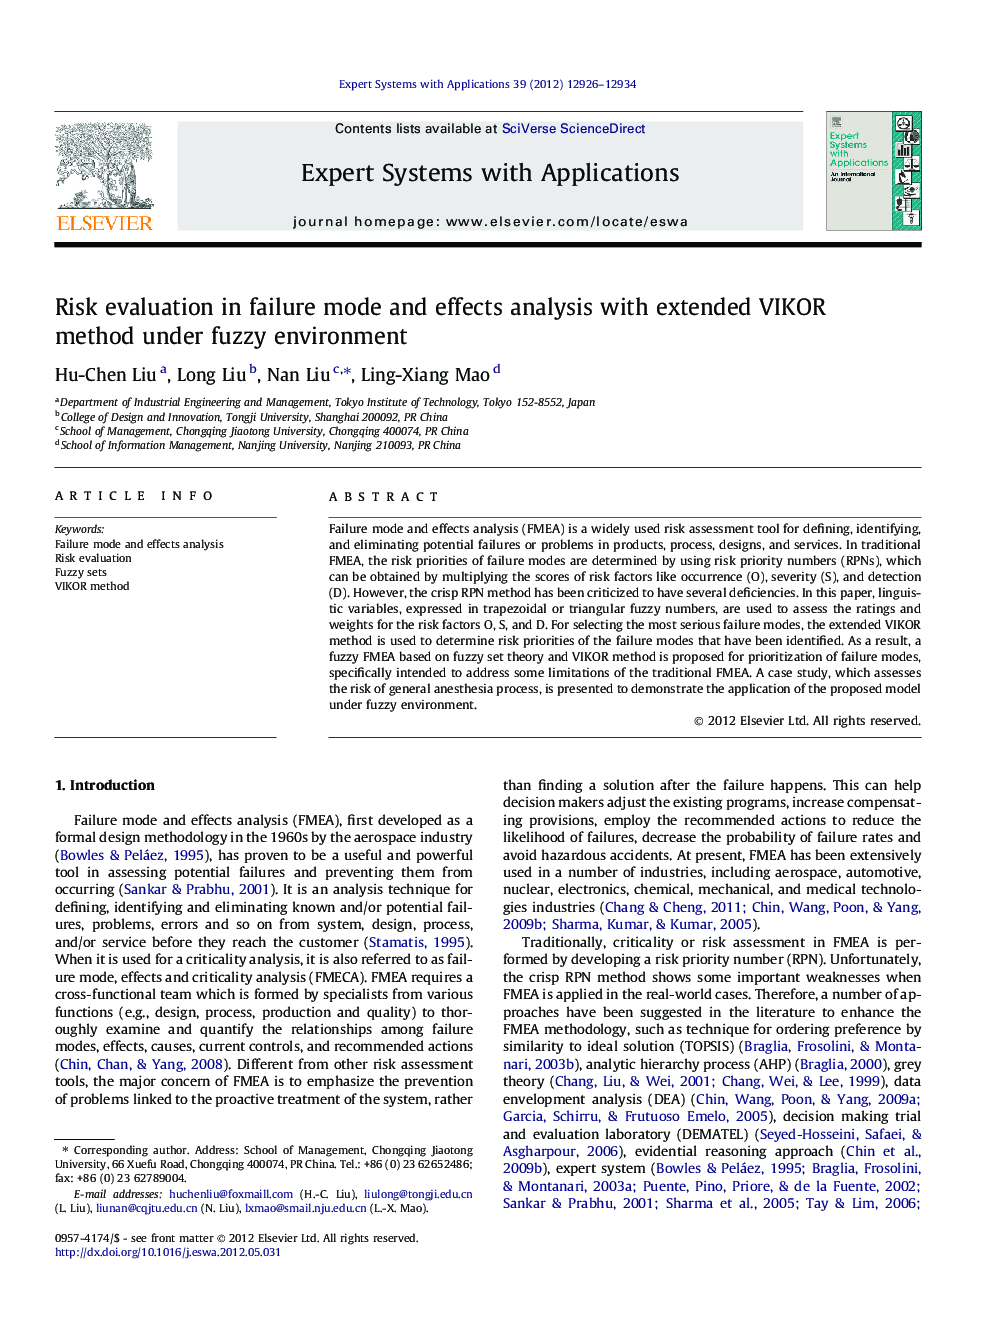 Risk evaluation in failure mode and effects analysis with extended VIKOR method under fuzzy environment